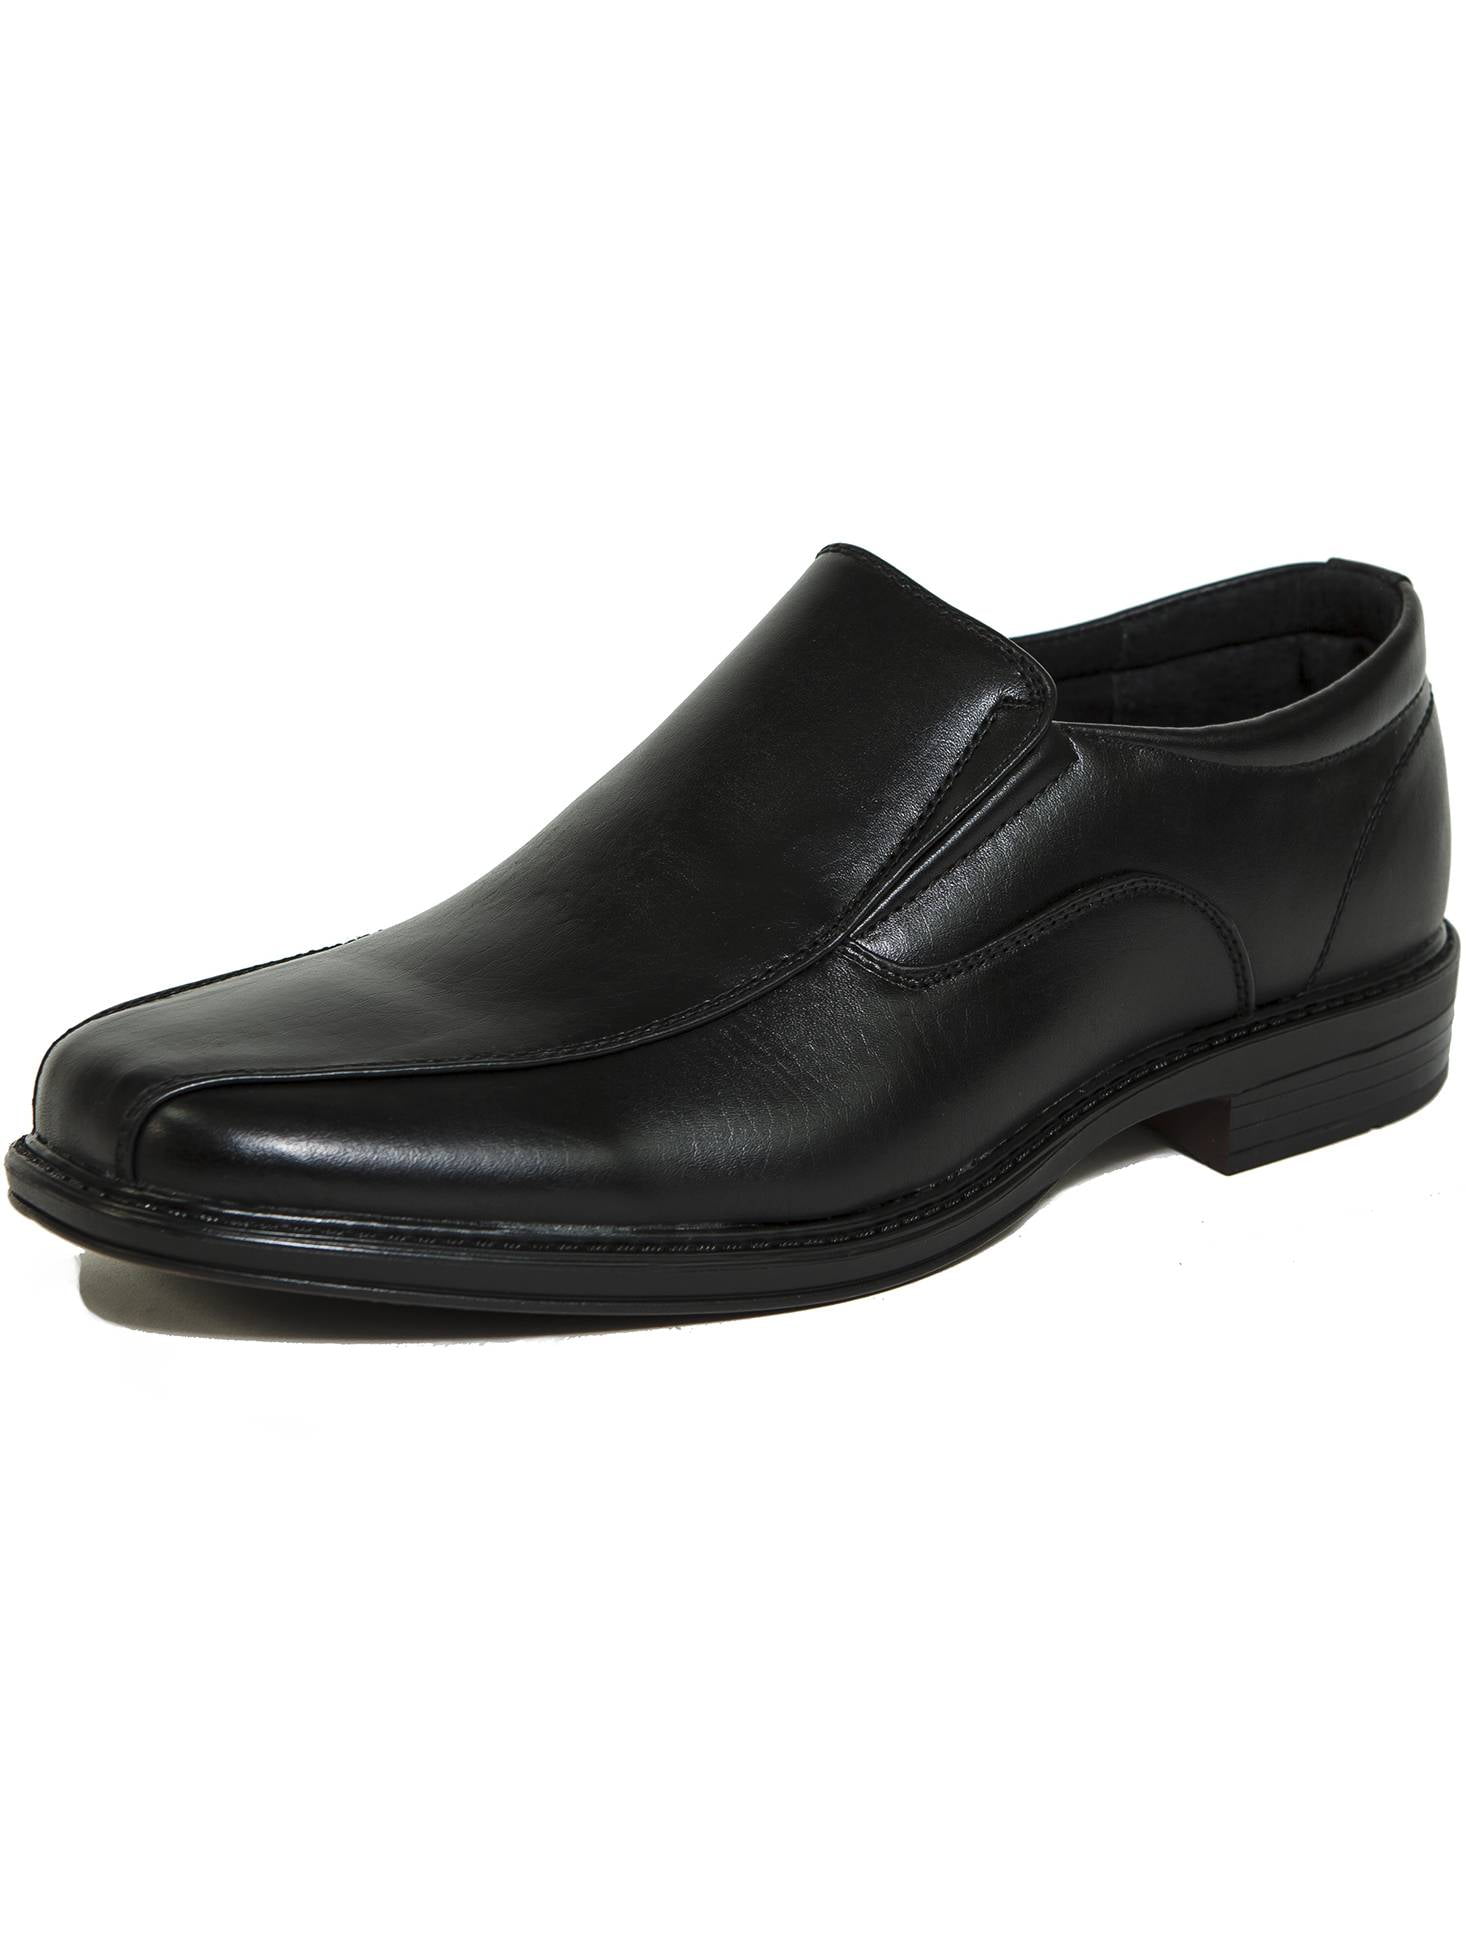 Men's Leather Lined Classic Formal Dress Comfort Loafers Slip-On Shoes